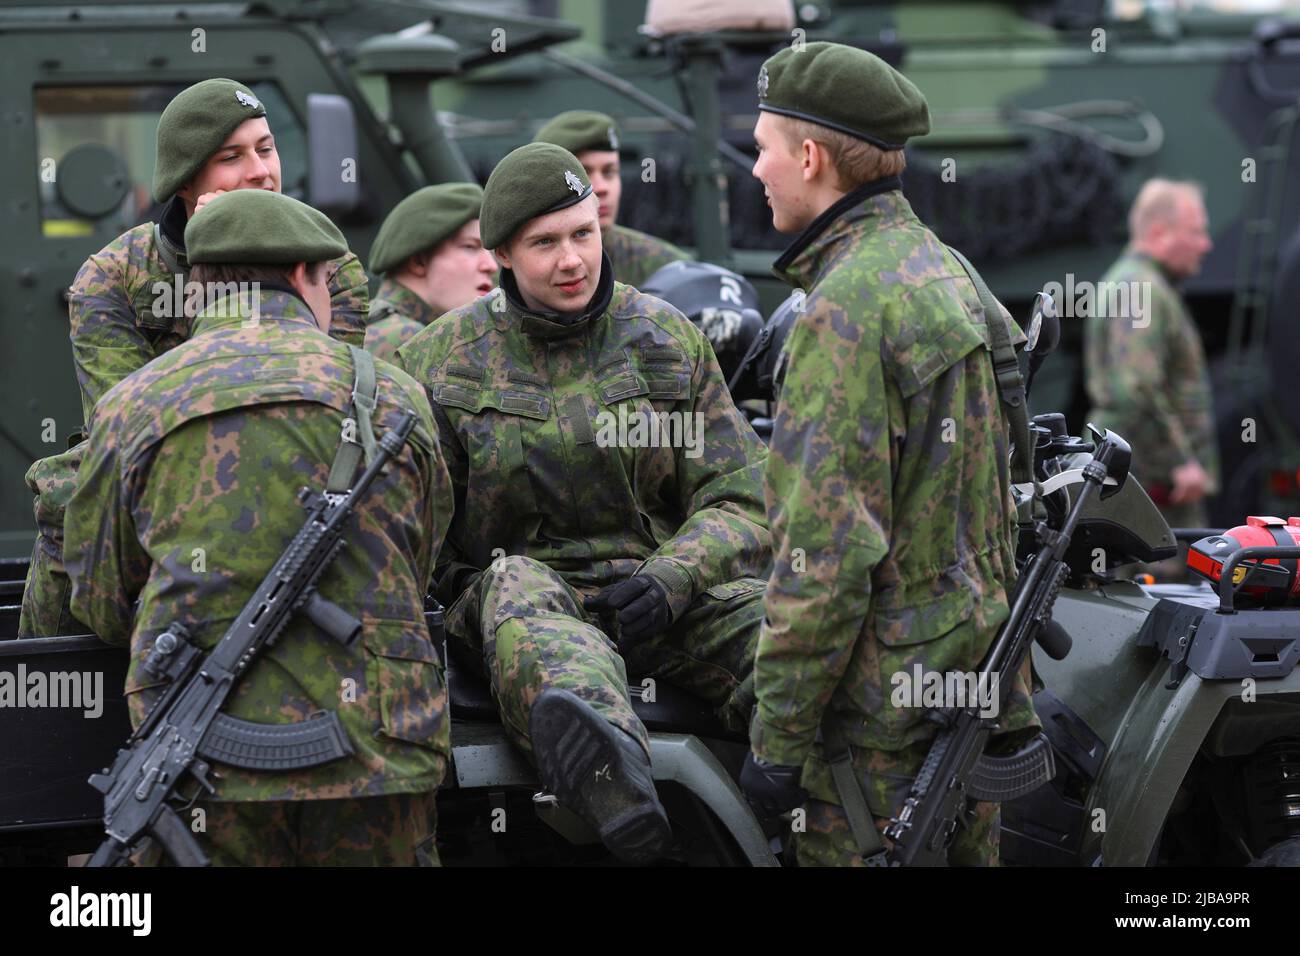 helsinki-finland-04th-june-2022-representatives-of-the-finnish-armed-forces-prepare-for-the-military-parade-at-the-senate-square-on-june-4th-during-the-celebration-of-the-national-holiday-flag-day-of-the-finnish-defence-forces-a-military-parade-was-held-in-helsinki-finland-photo-by-takimoto-marinasopa-imagessipa-usa-credit-sipa-usaalamy-live-news-2JBA9PR.jpg